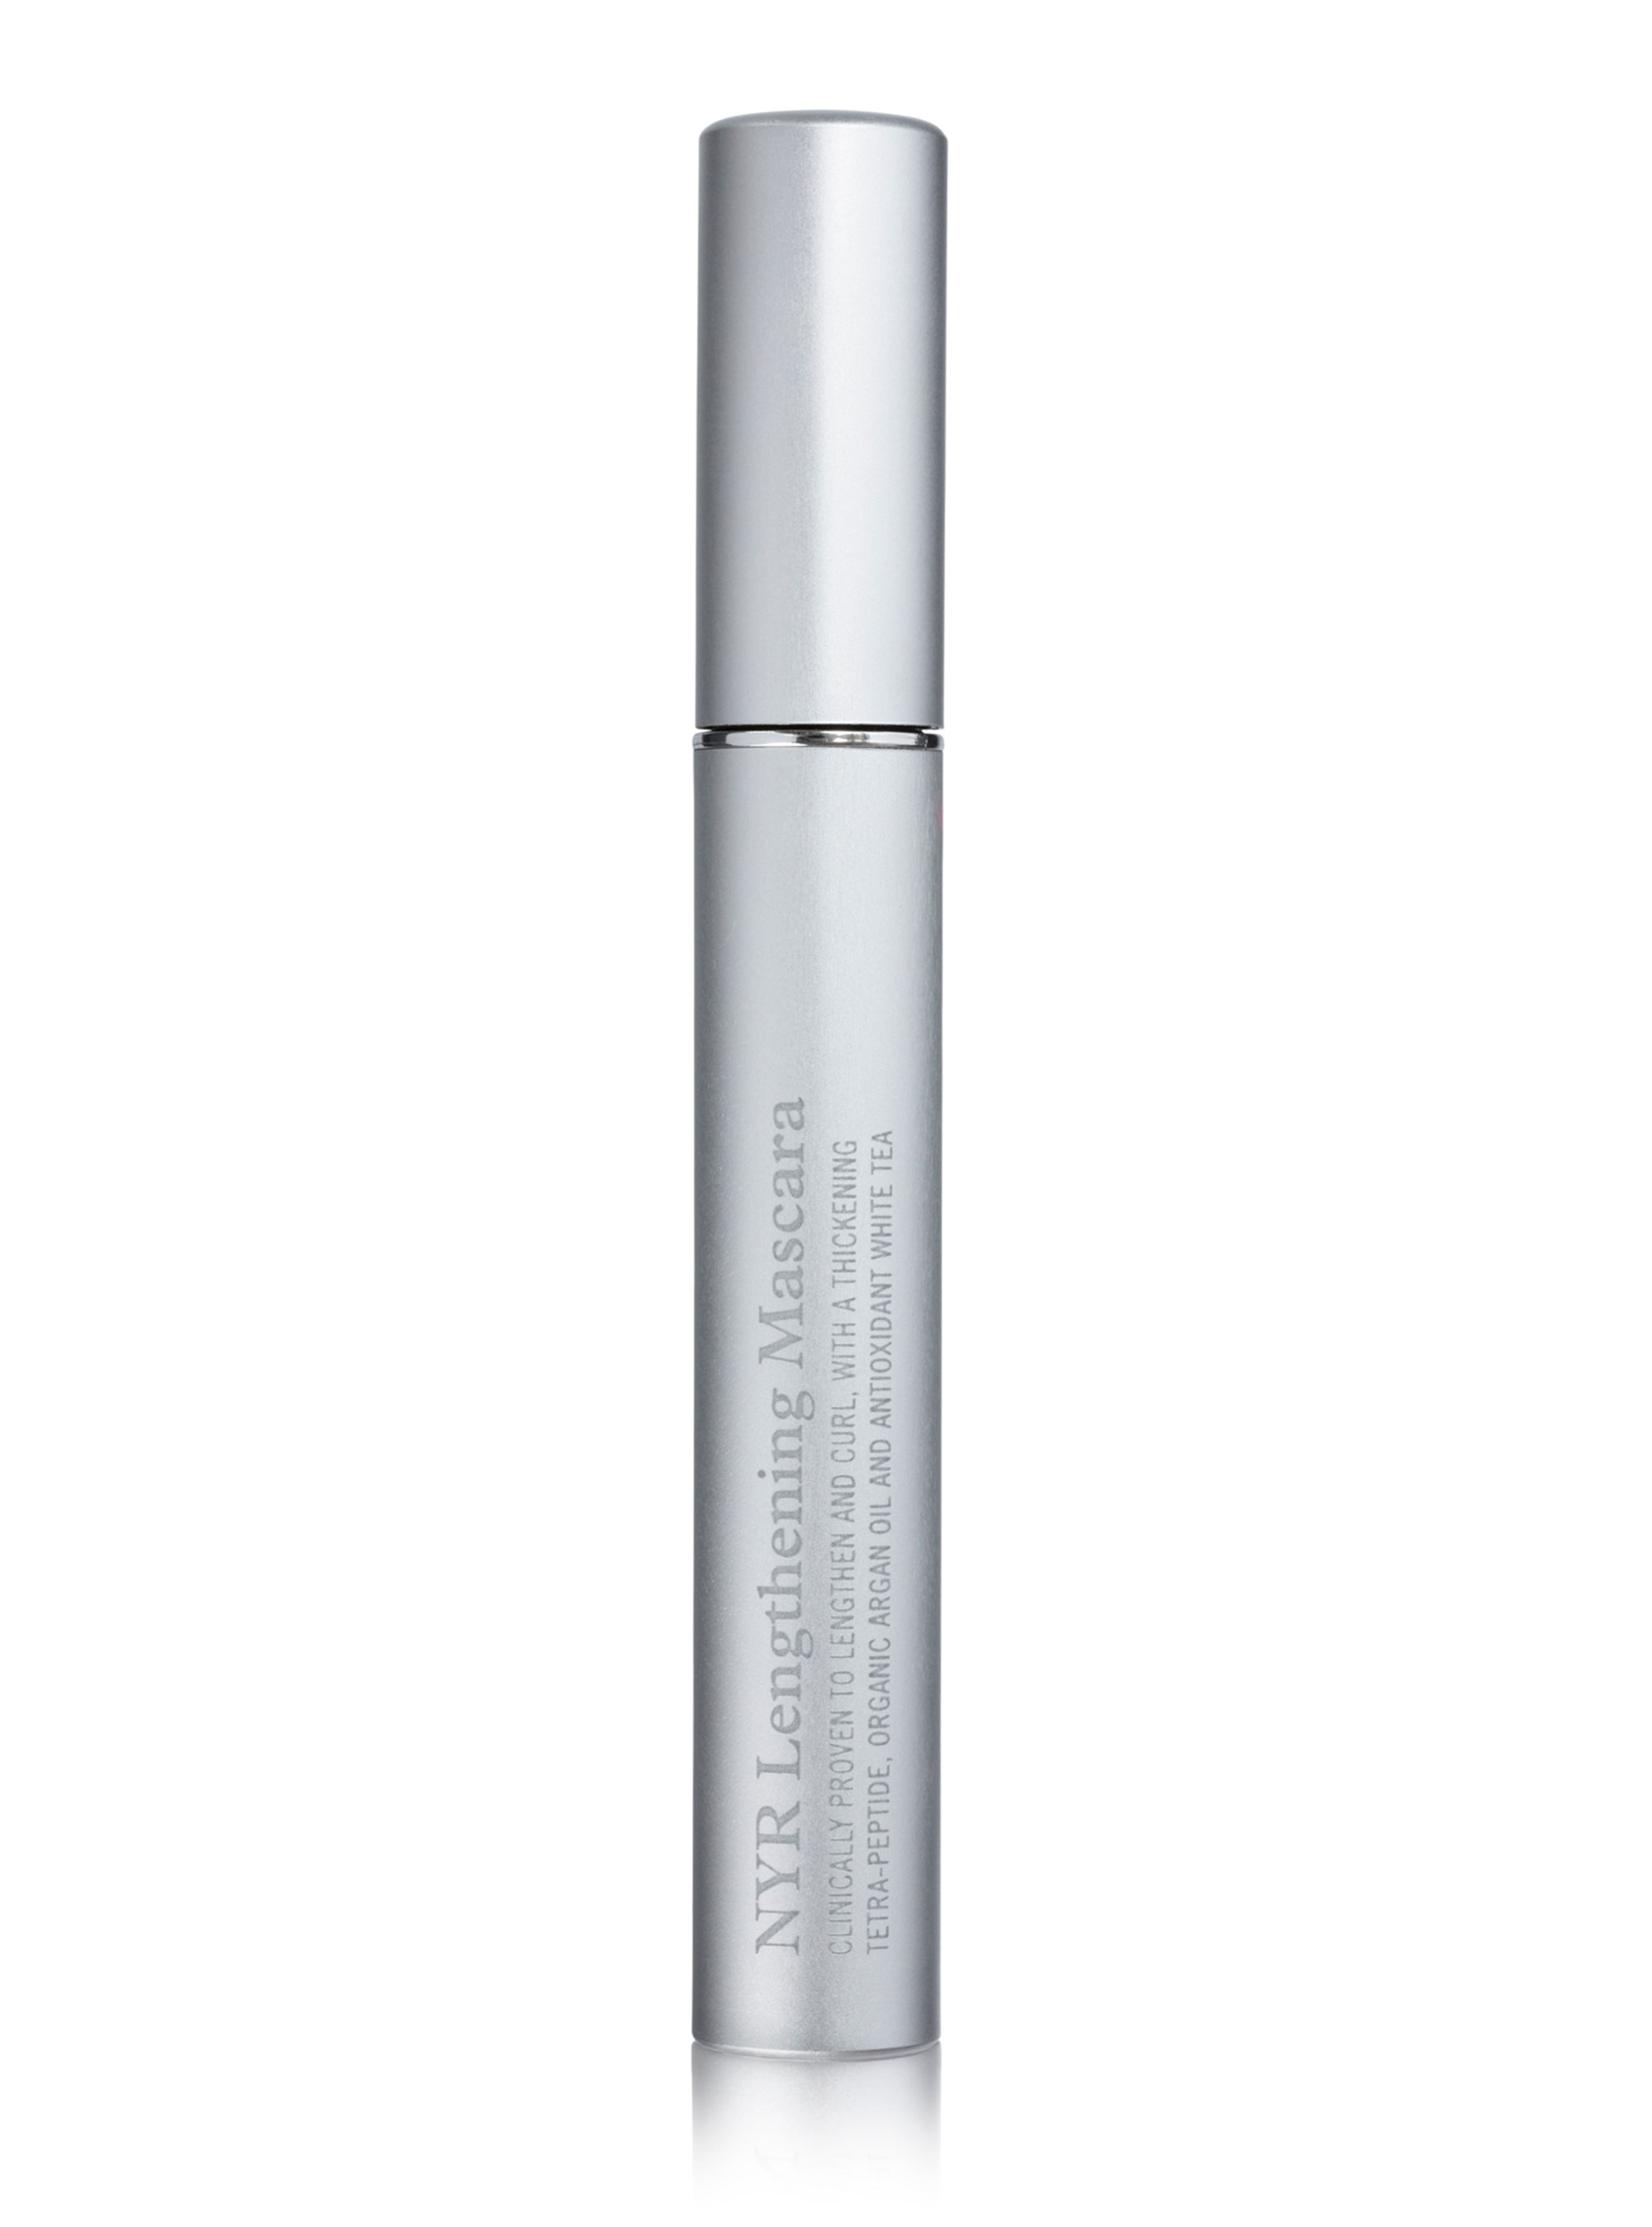 Cruelty Free Makeup - Lengthening Mascara, £16, Neals Yard - Woman And Home